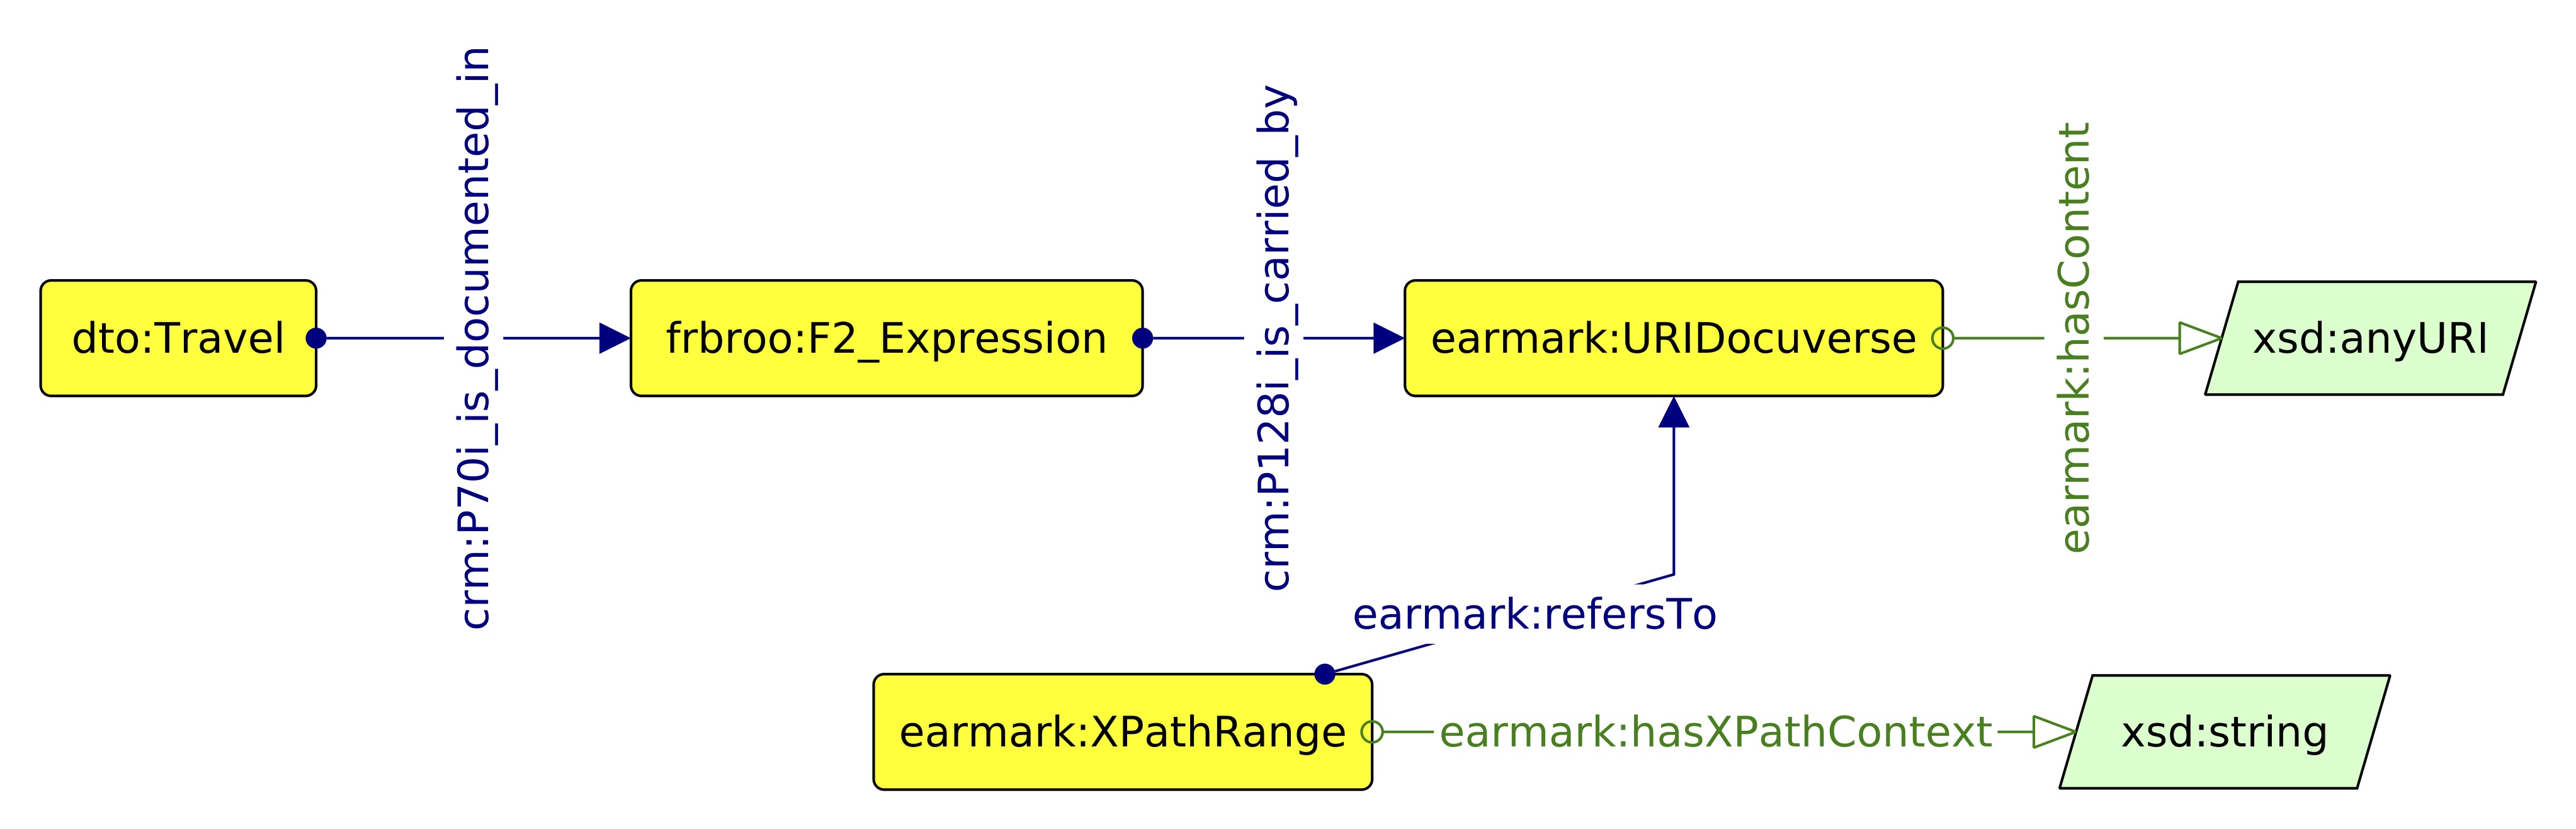 Diagram of possible annotation scheme to connect text with data via semantic annotations.